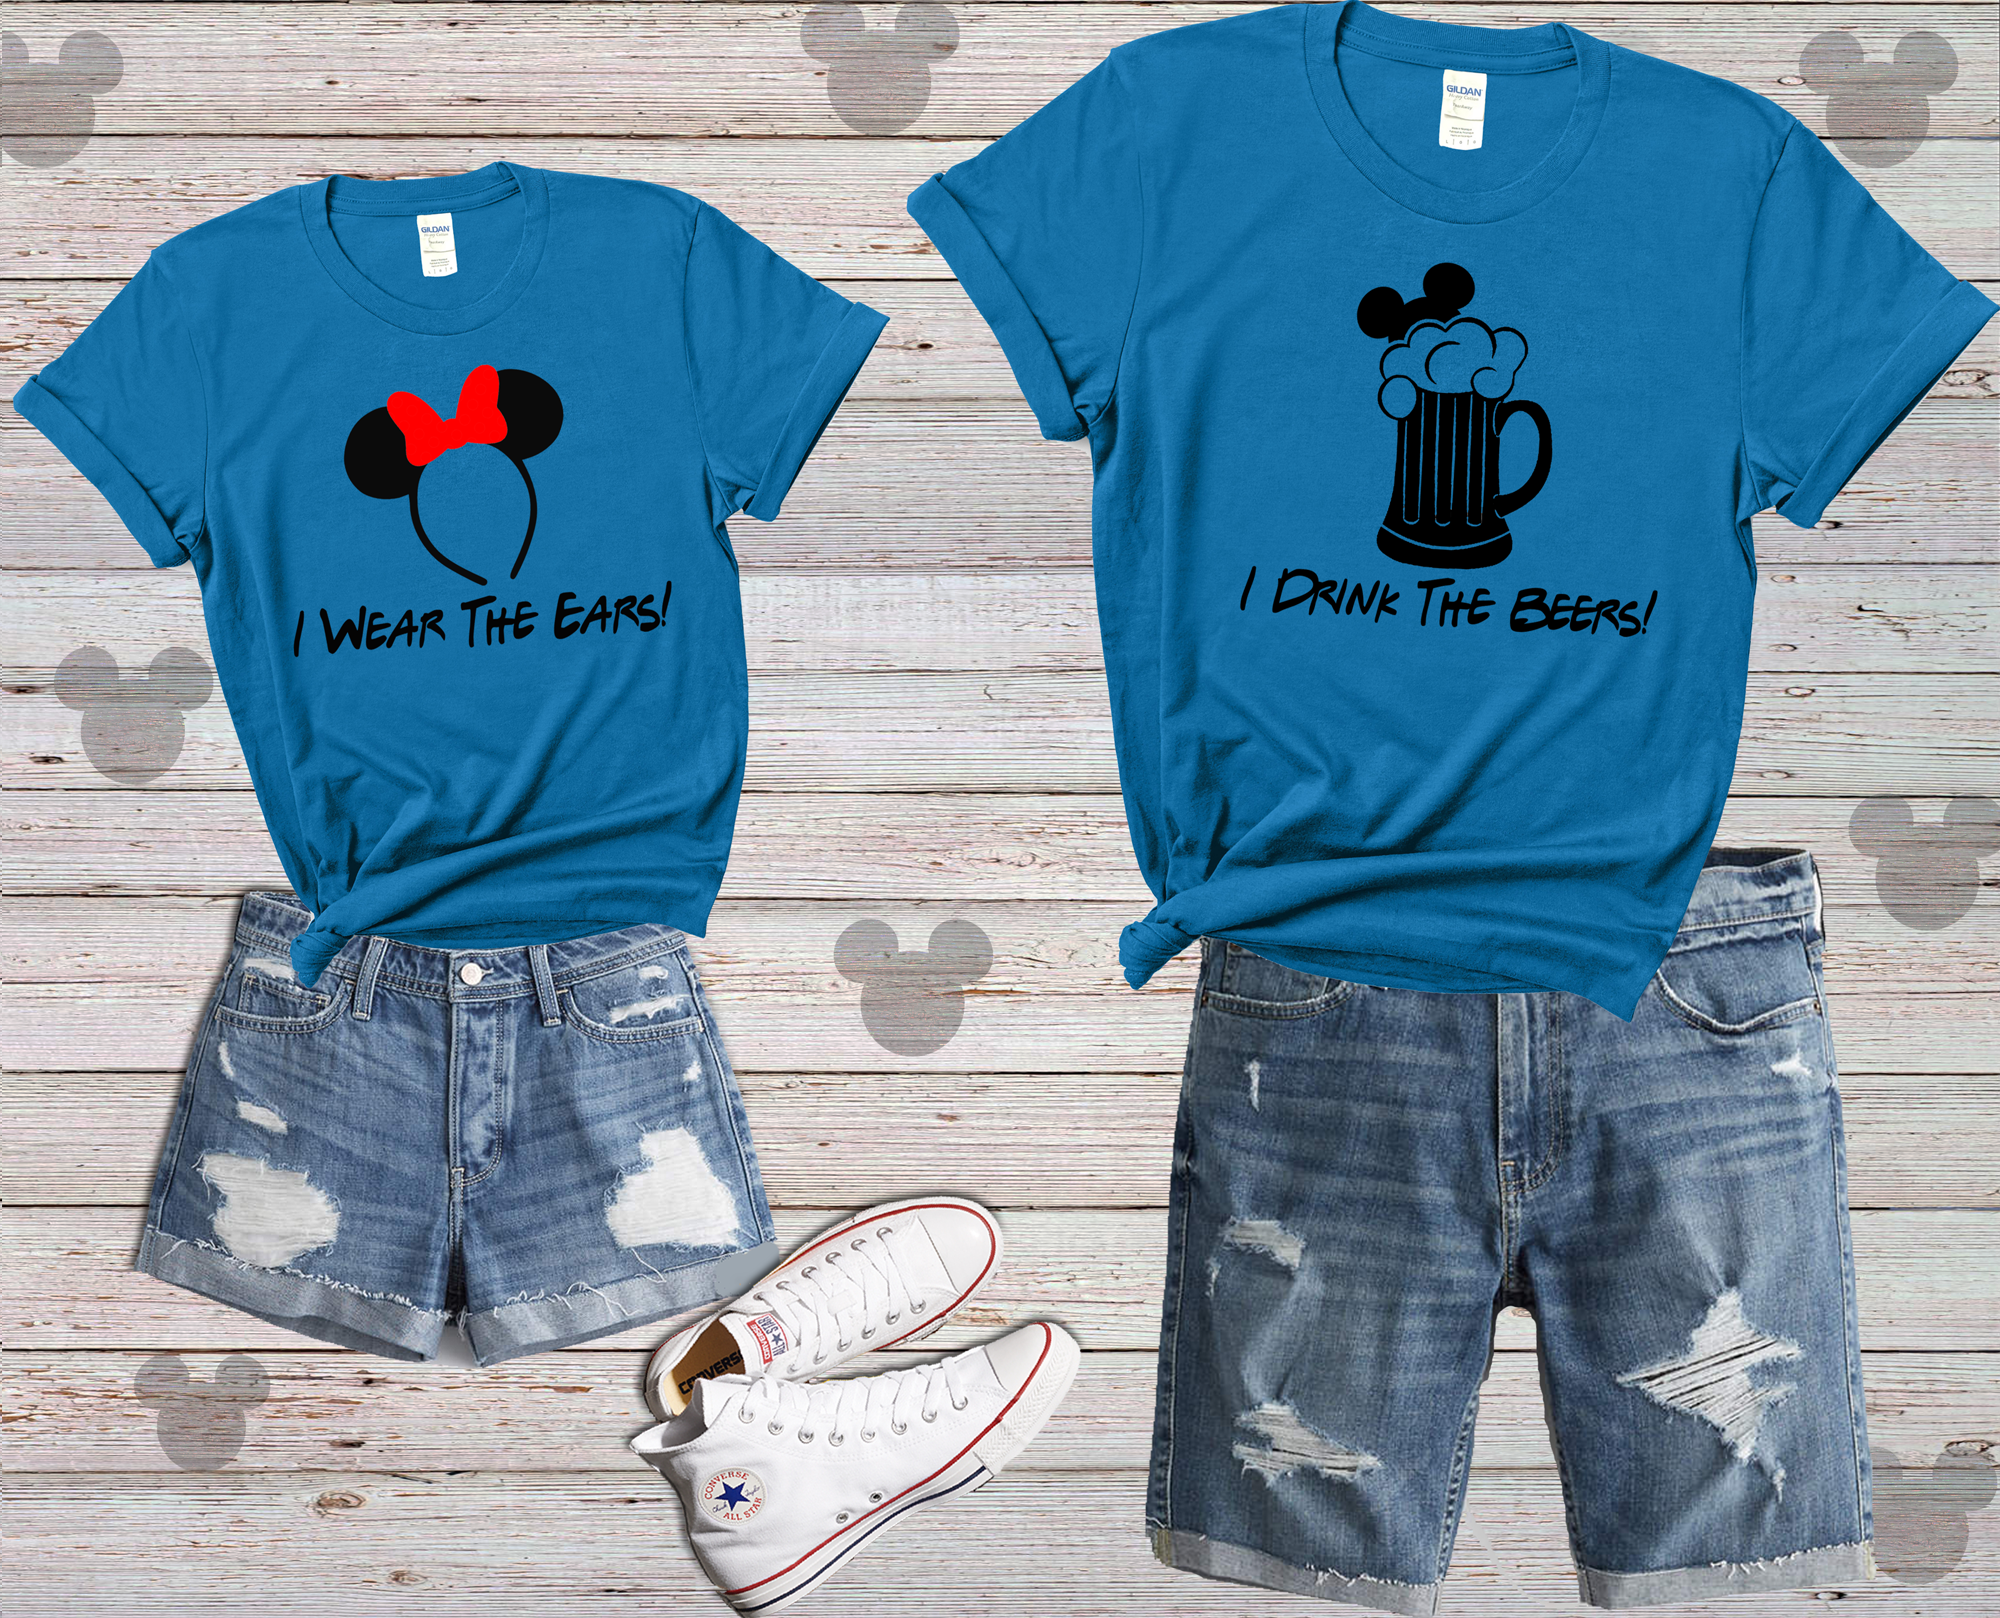 I Wear The Ears and I Drink The Beers Shirt, Disney Couples Shirt, Disney Vacation Shirt, Bride and Groom Shirts, Disney World Matching Tee Adult